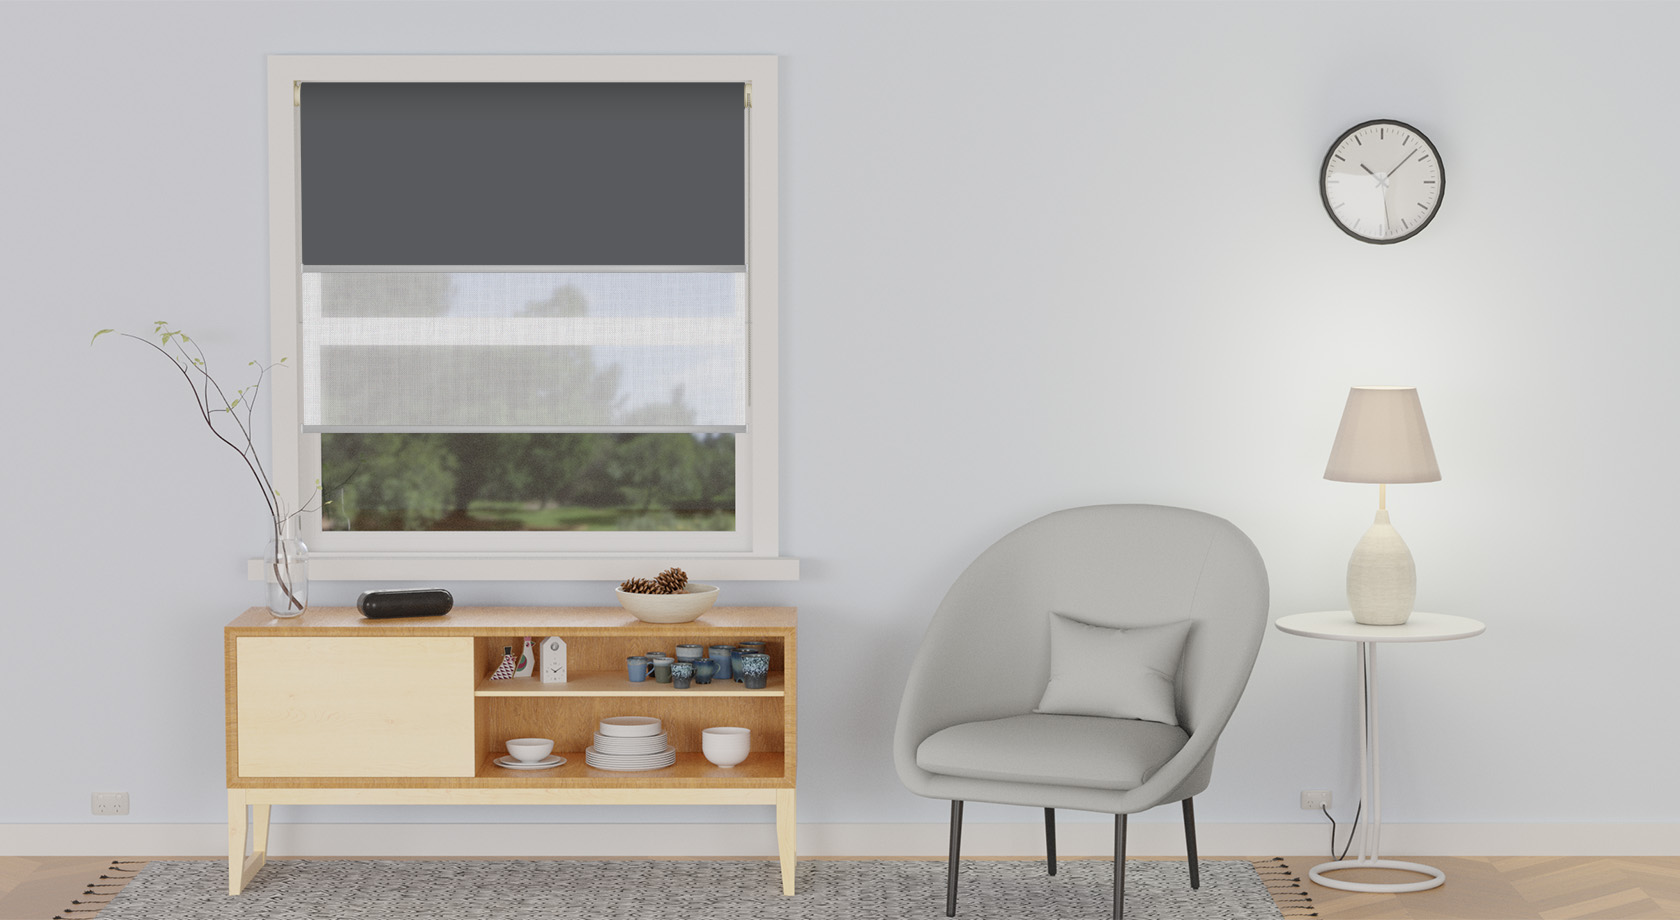 Blockade & Durascreen Double Roller Blind - Blockade blockout paired with Durascreen | Buy Online & Save!